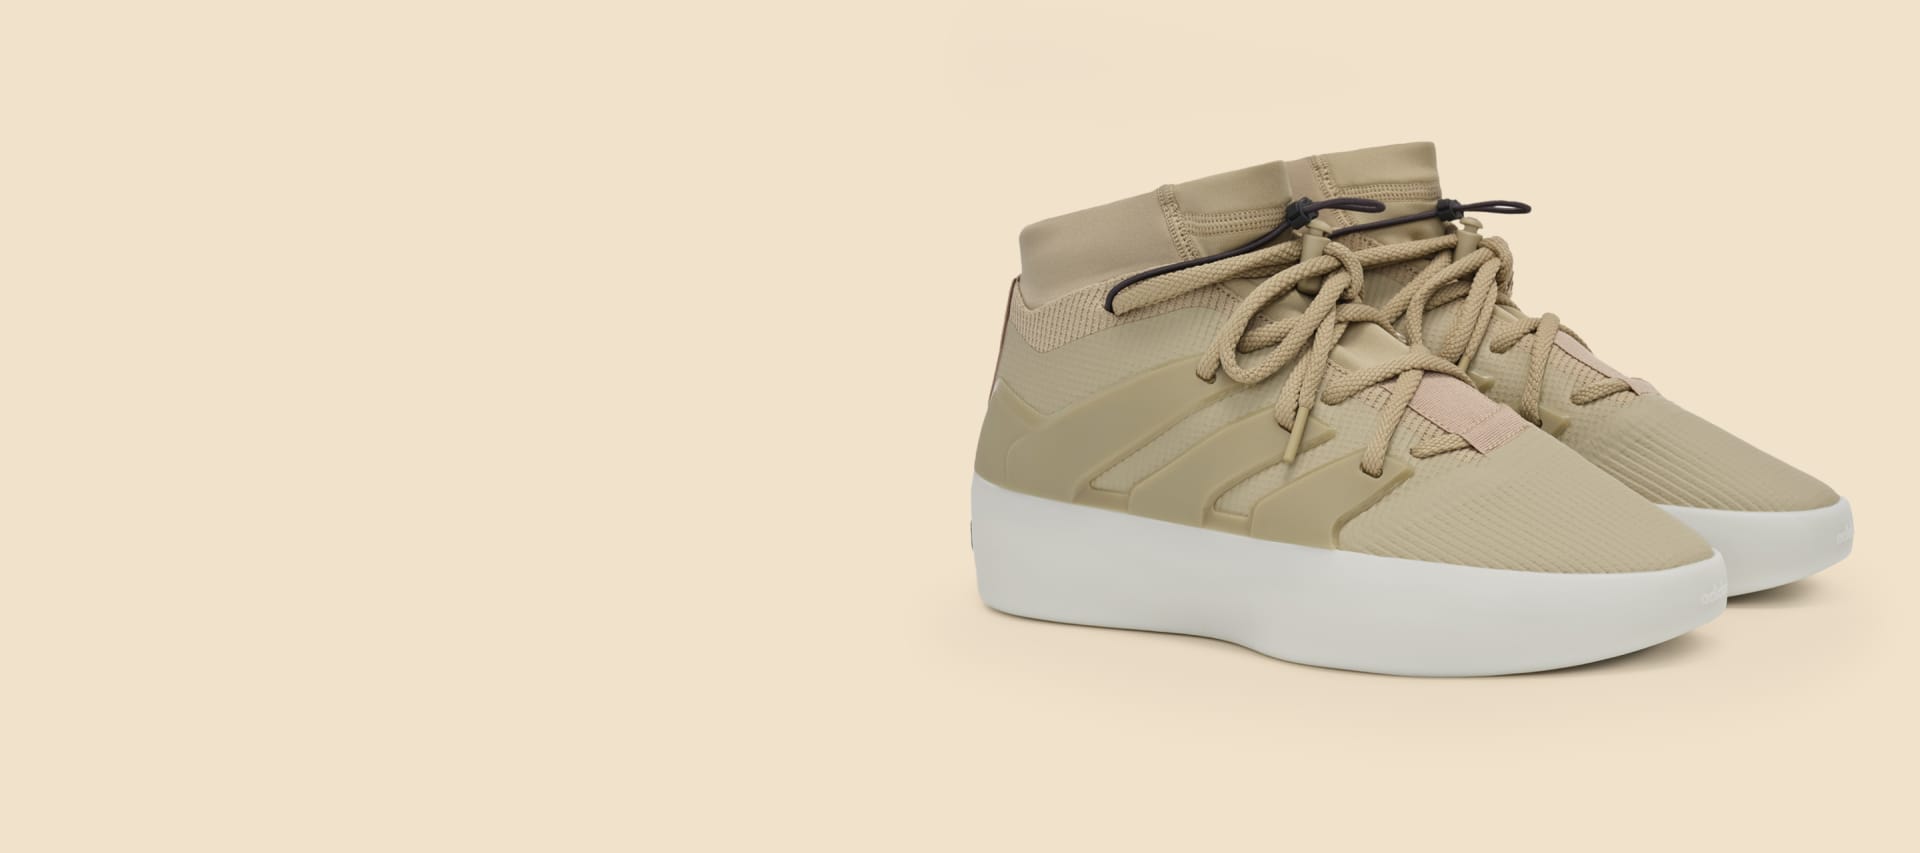 Beige shoe with white sole on cream background.